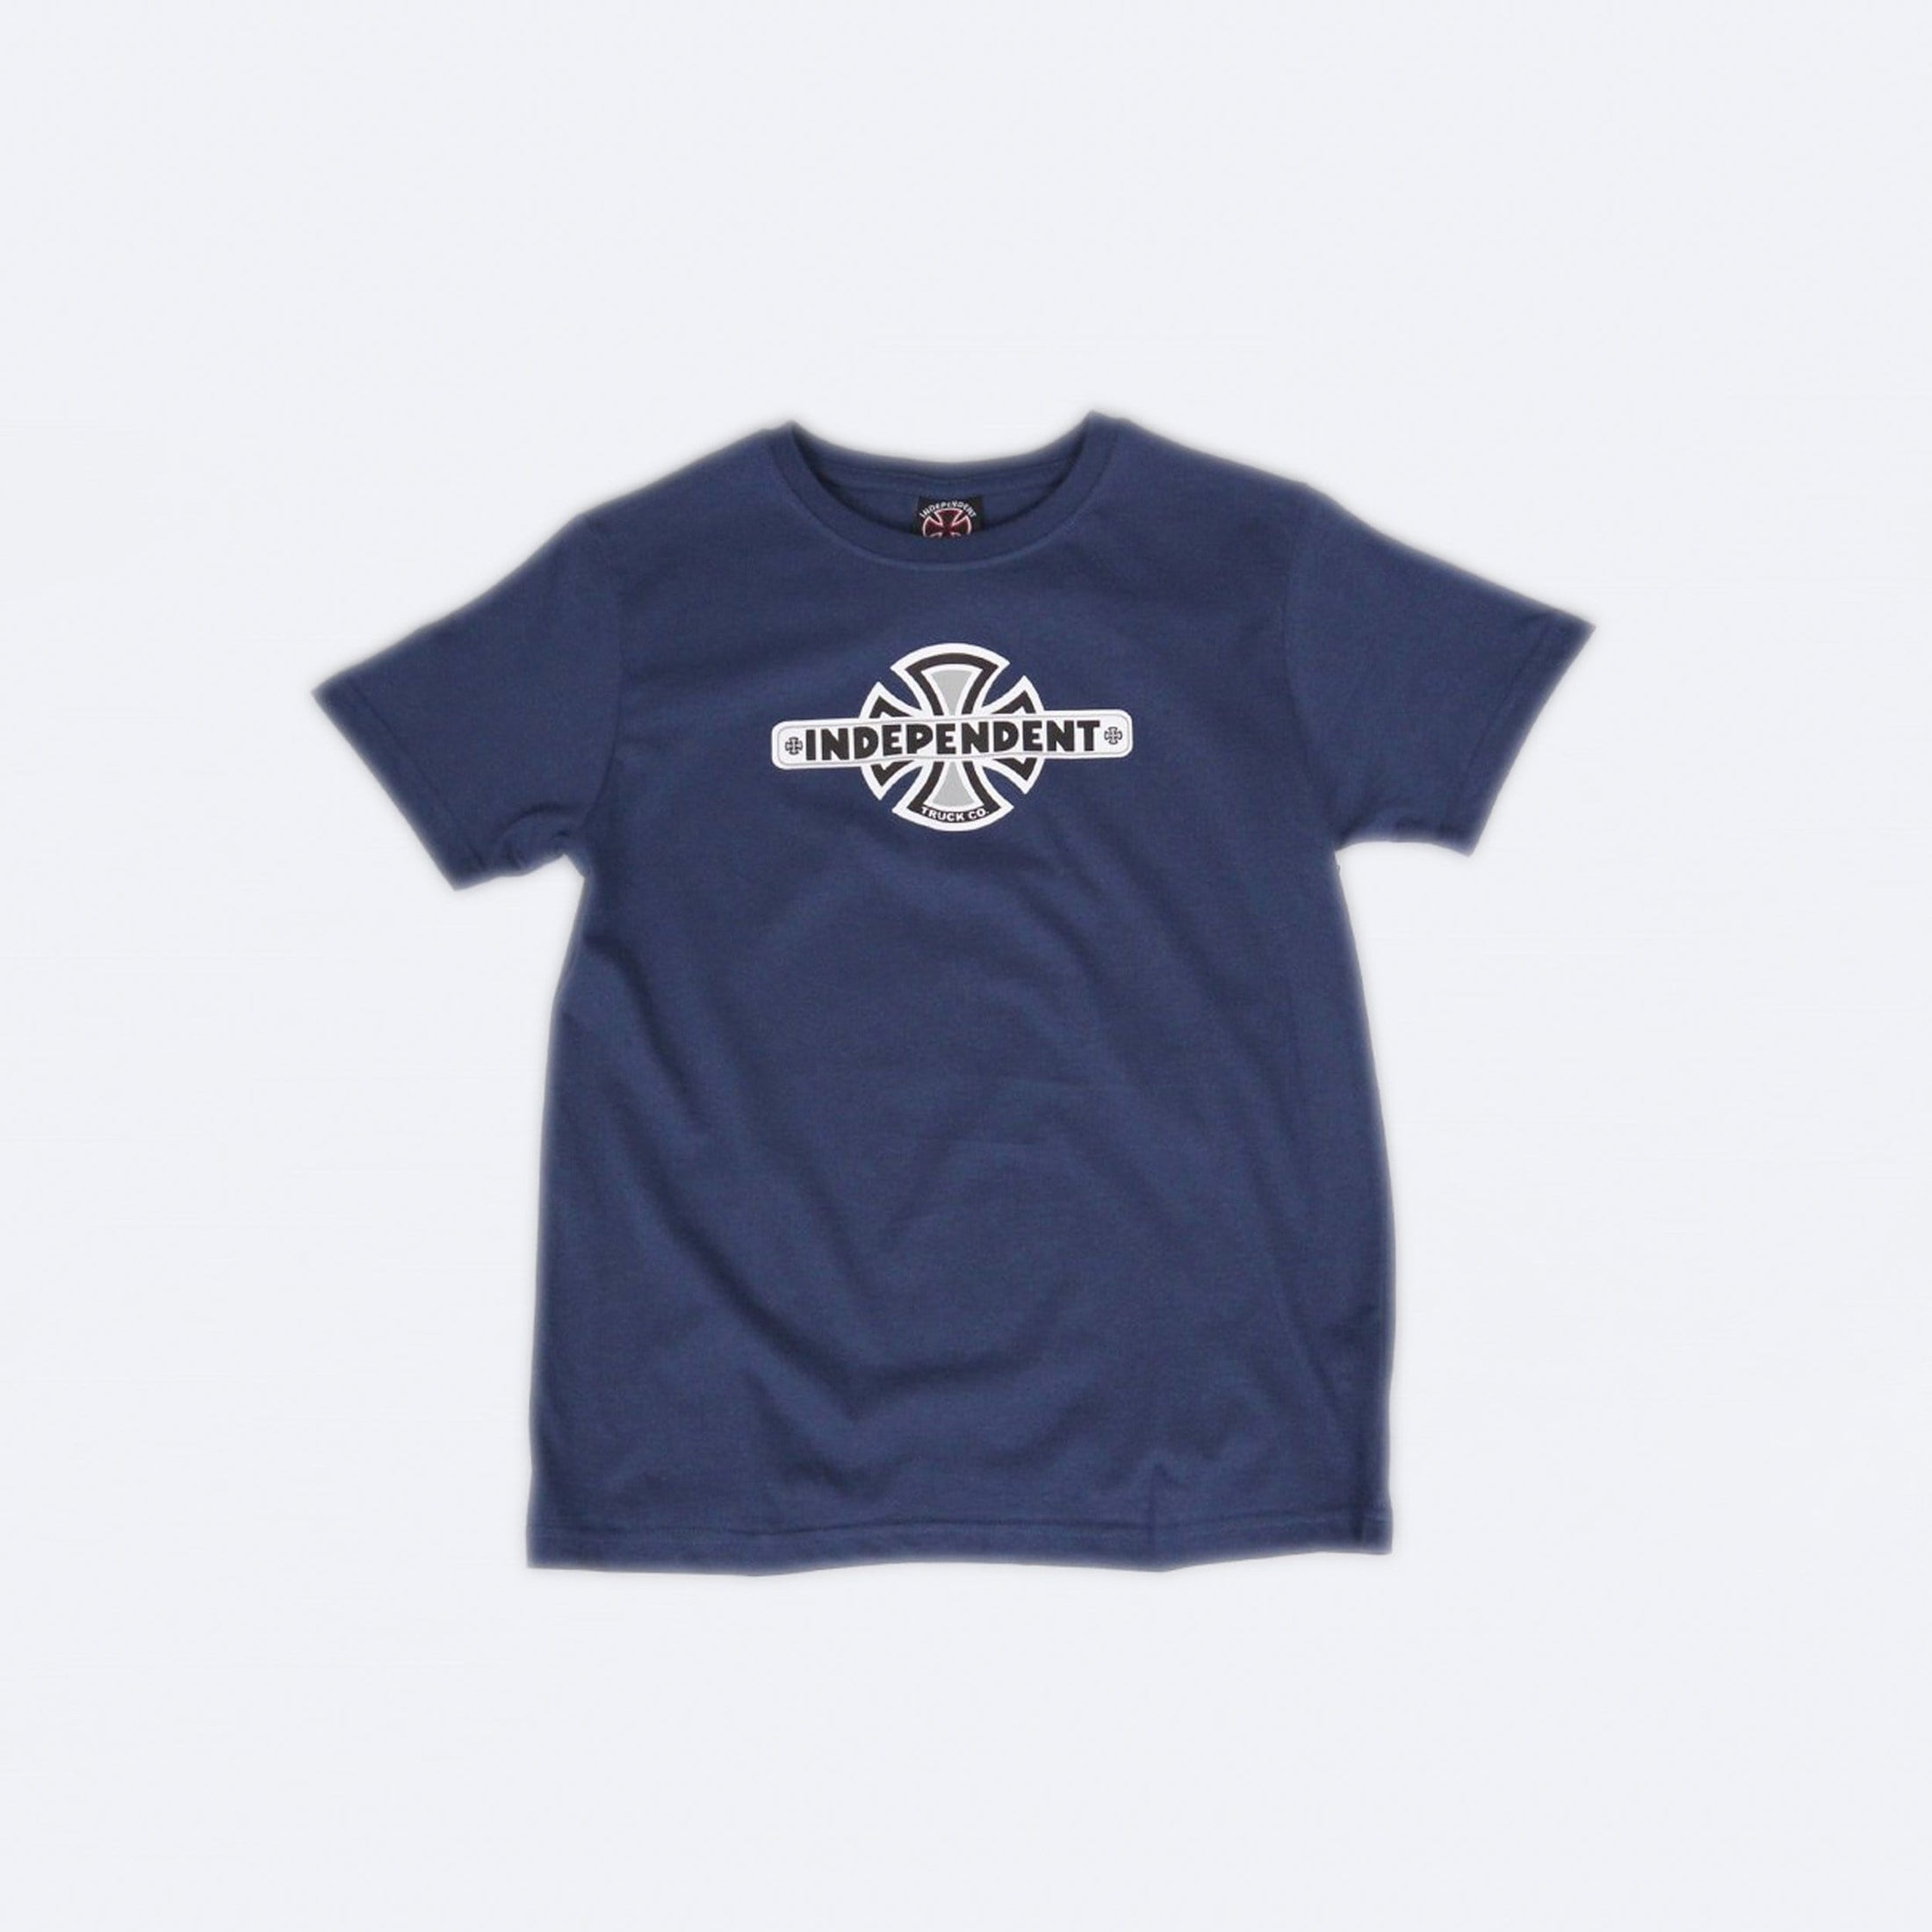 Independent Vintage Cross Youth T-Shirt Navy